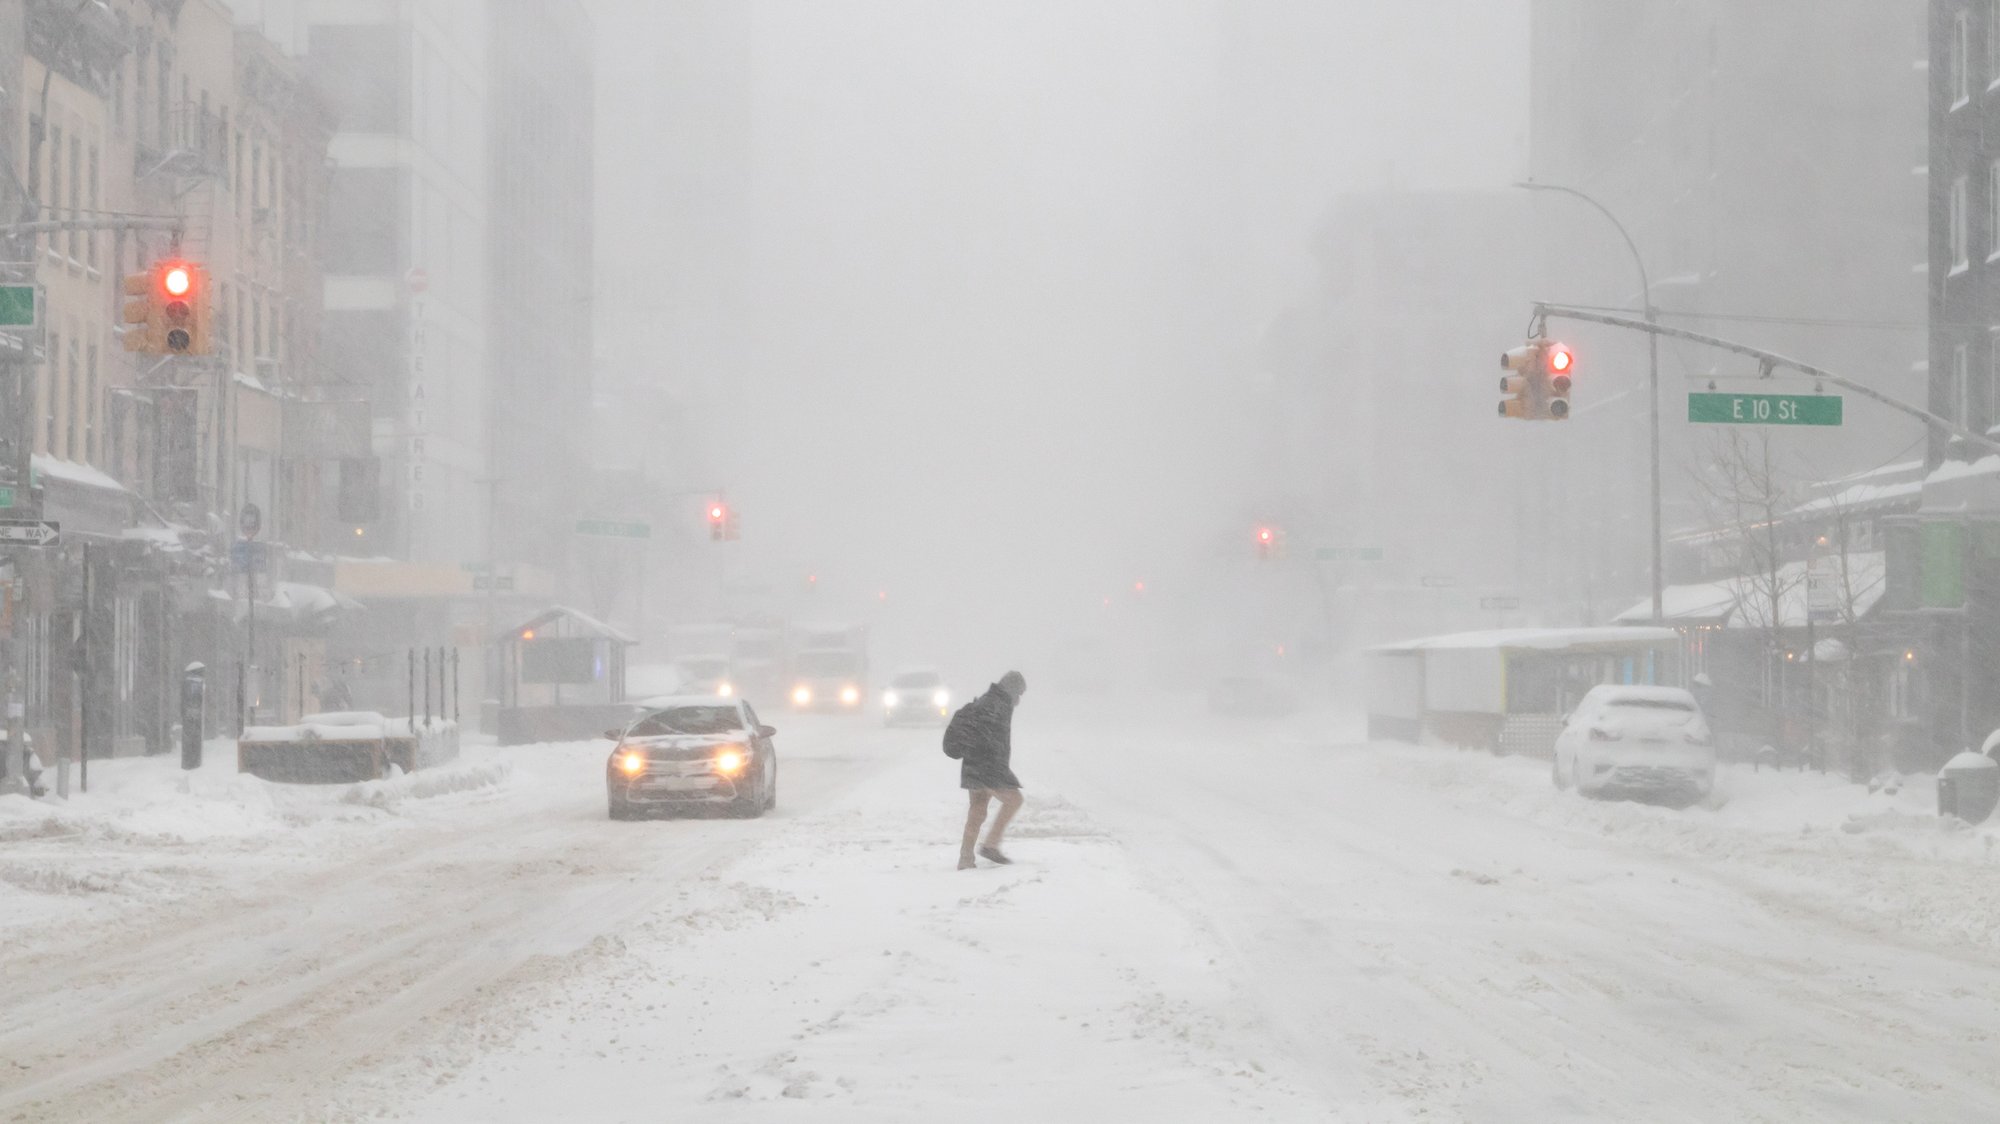 NYC in the middle of a snowstorm